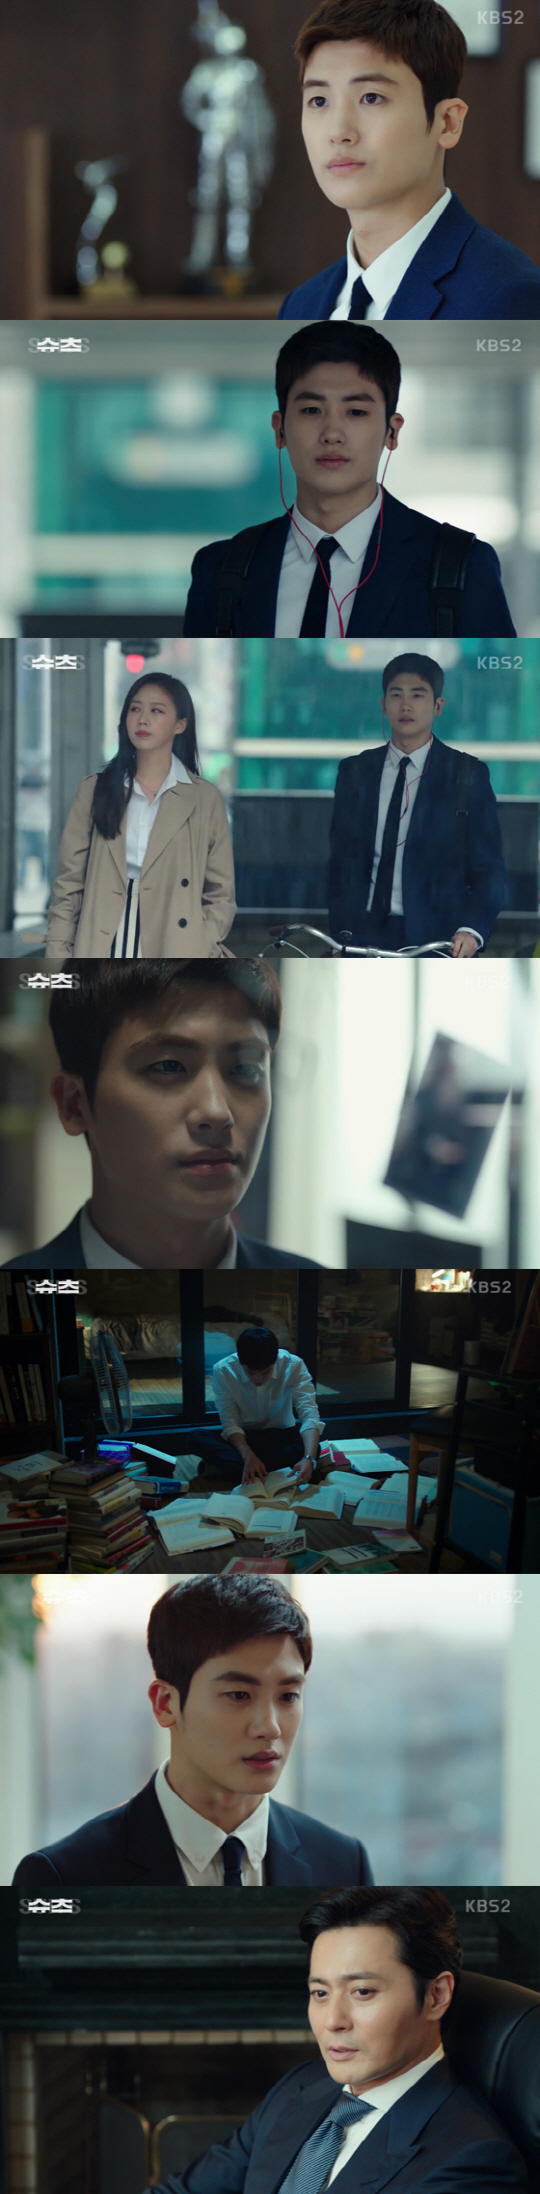 In the KBS 2TV new drama Suits, which was first broadcast on the 25th, Aces defense was shown by Miniforce Seok selecting Park Hyung-sik. On this day, Miniforce headed to prison, where a high-ranking man in a prison uniform sat at this time in Park Hyeong- Through the voice of Sik, a narration was It is not a coincidence but a choice to decide fate. Kang & Ham Law Firms Ace lawyer Miniforce was full of room in front of clients.Kang Ha-yeon (Jin Hee-kyung) expressed his strong trust that Chois lawyer is my voice and my strength. He also stabbed the client to get rid of him and said, You know.I never stand for insulting you. Is there another partner like me? he smiled, smiling with a relaxed smile.Ko Yeon-woo, who was valet-parking at the club at that time, showed a unique memory in front of Park Joon-pyo (Lee Kyung-kyung), a chaebol 2, at the request of his friend Chul Soon (Lee Sang-i).At this time, Park Joon-pyo sarcastically criticized Ko Yeon-woo, and Ko Yeon-woo said, The dog does not even have a pretty person, but the other dog is a door.Especially if you are a crazy dog who knows only the scary money and does not know the scary people, he said, and left the room. He demanded that Park Joon-pyo, who was angry, deliver drugs to Ko Yeon-woo.I tried to refuse it early, but I took a bag, but it was a scheme of Park Joon-pyo.As he fled, he headed to the lawyers interview room, where he faced the Miniforce seat, which he answered without any clogging.However, at this time, the bag was opened and the drug in the bag was poured. The Miniforce, who explained the whole thing to the Miniforce, and the Miniforce who recognized the extraordinary genius of the man, said, Please defend yourself in front of the police.Miniforce said, It is a pass.After reading the law related books, Ko Yeon-woo went back to the Miniforce seat the next day, but Miniforce said to Ko Yeon-woo, You do not need to sit.Suits is a drama depicting the legendary lawyer of the best law firm in Korea, Gang & Ham, and the bromance of a fake new lawyer with a genius memory.